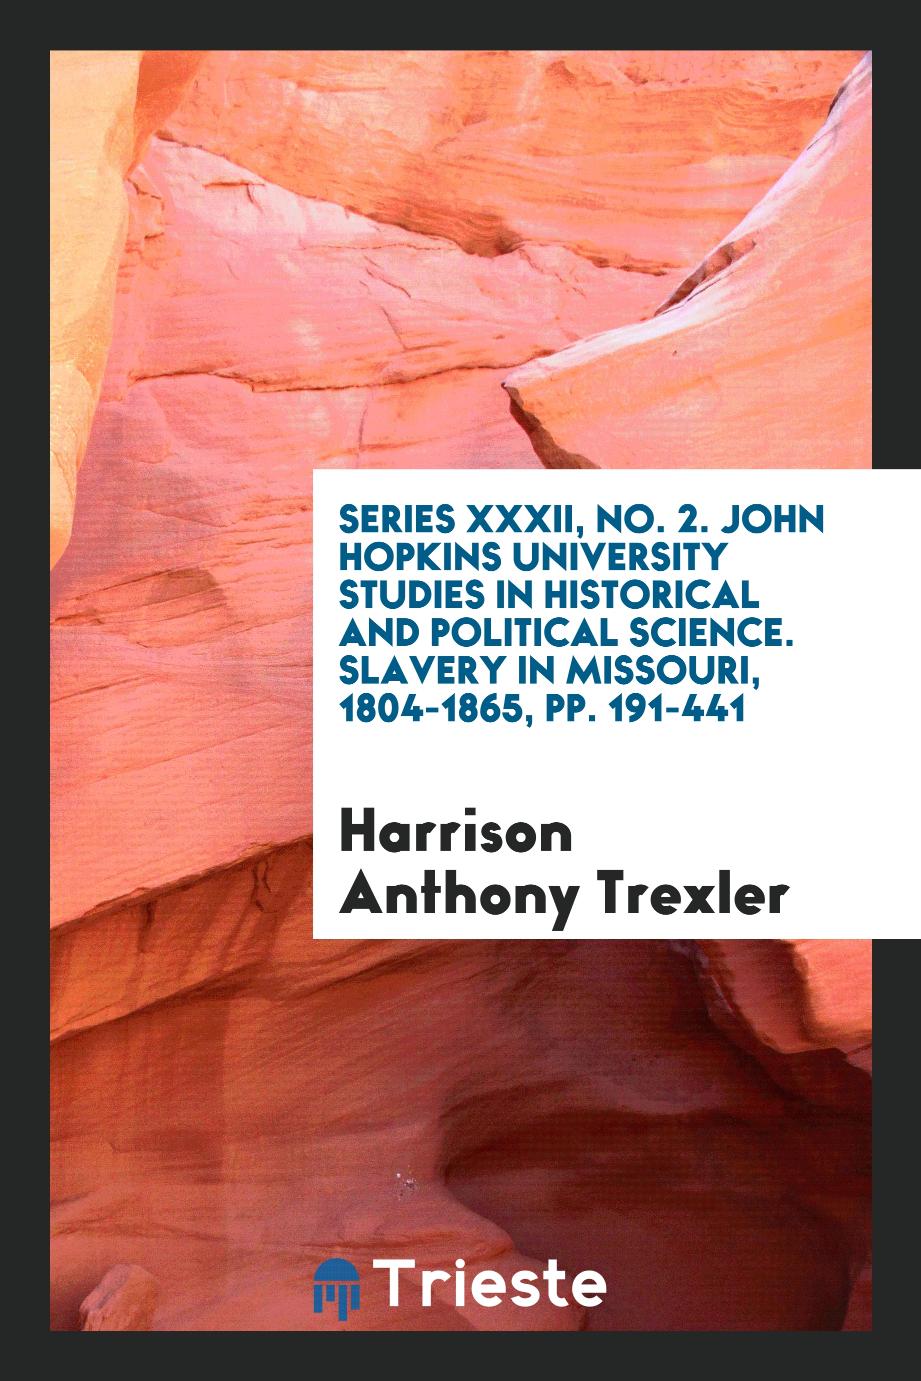 Series XXXII, No. 2. John Hopkins University Studies in Historical and Political Science. Slavery in Missouri, 1804-1865, pp. 191-441